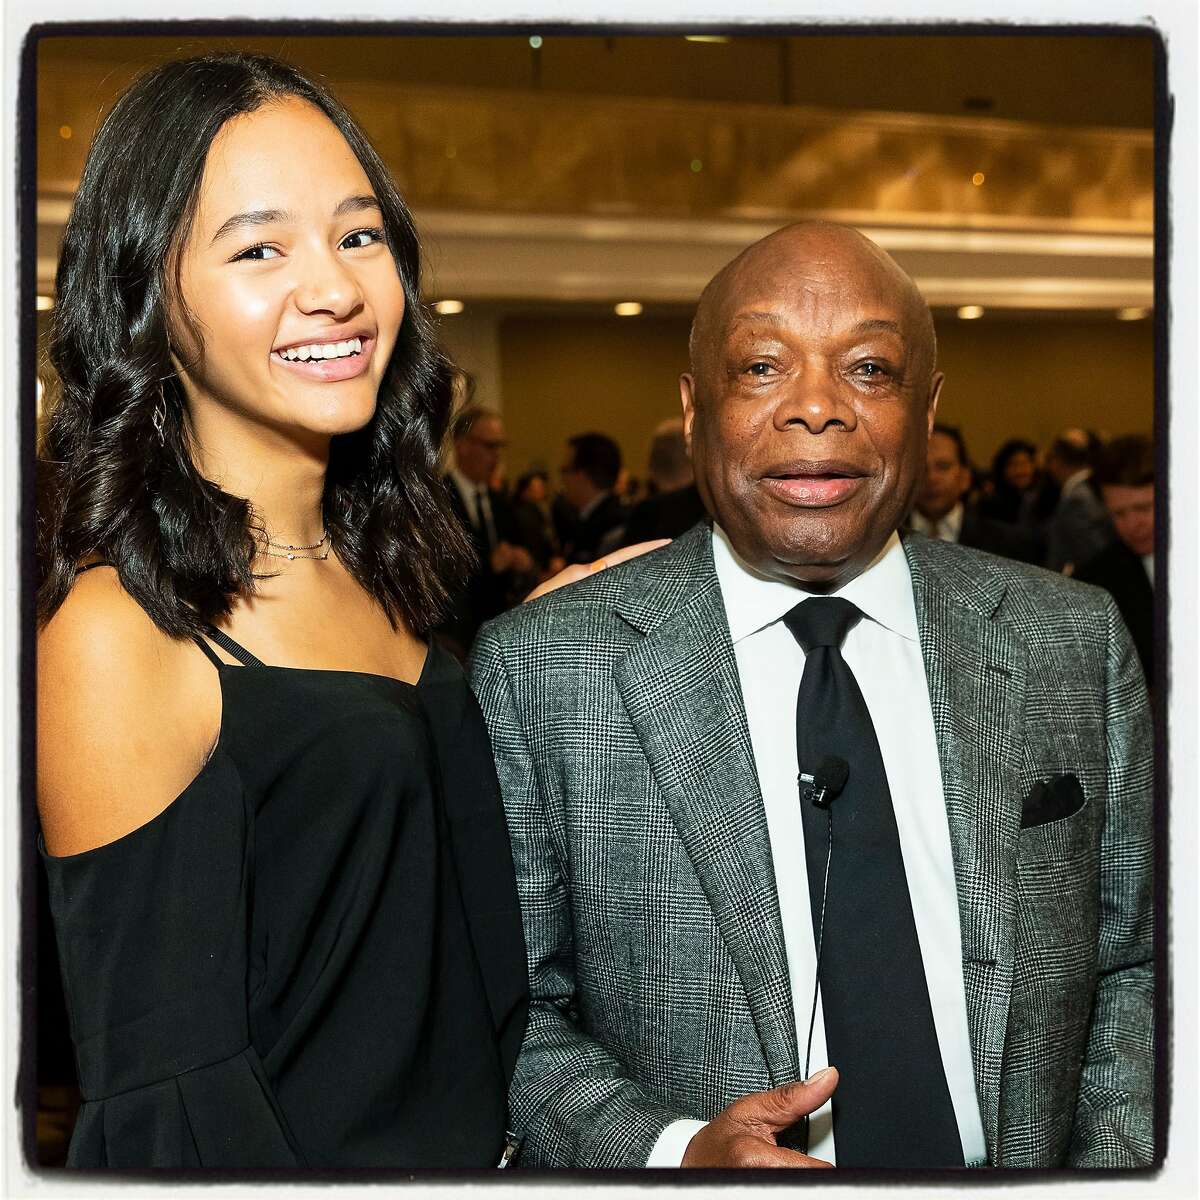 Sydney Brown and her dad, former Mayor Willie Brown at the Willie Brown Institute Breakfast Club. Oct. 30, 2018.